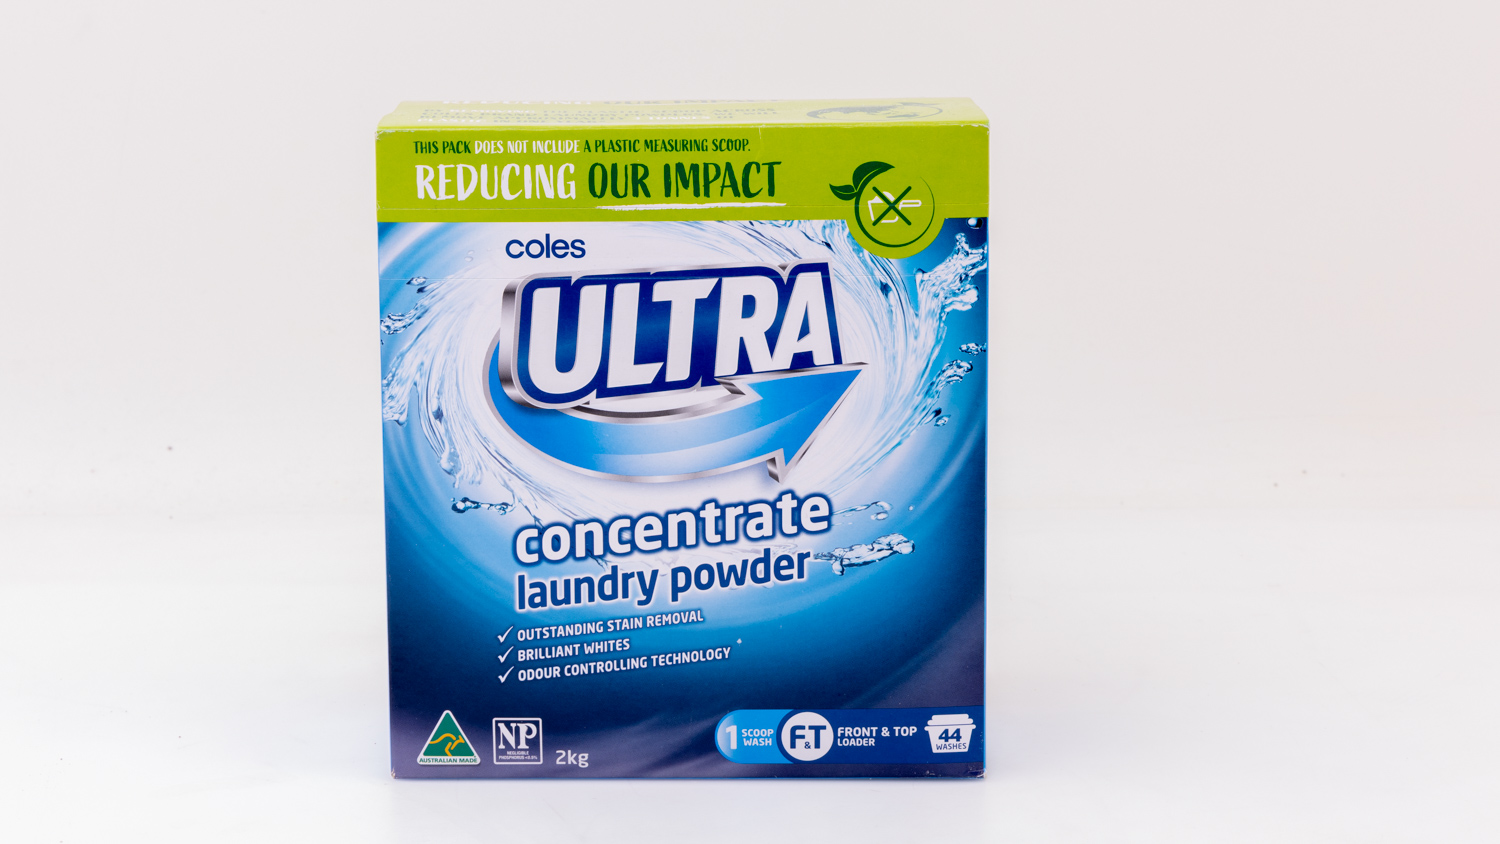 Coles Ultra Concentrate Laundry Powder Top Loader carousel image